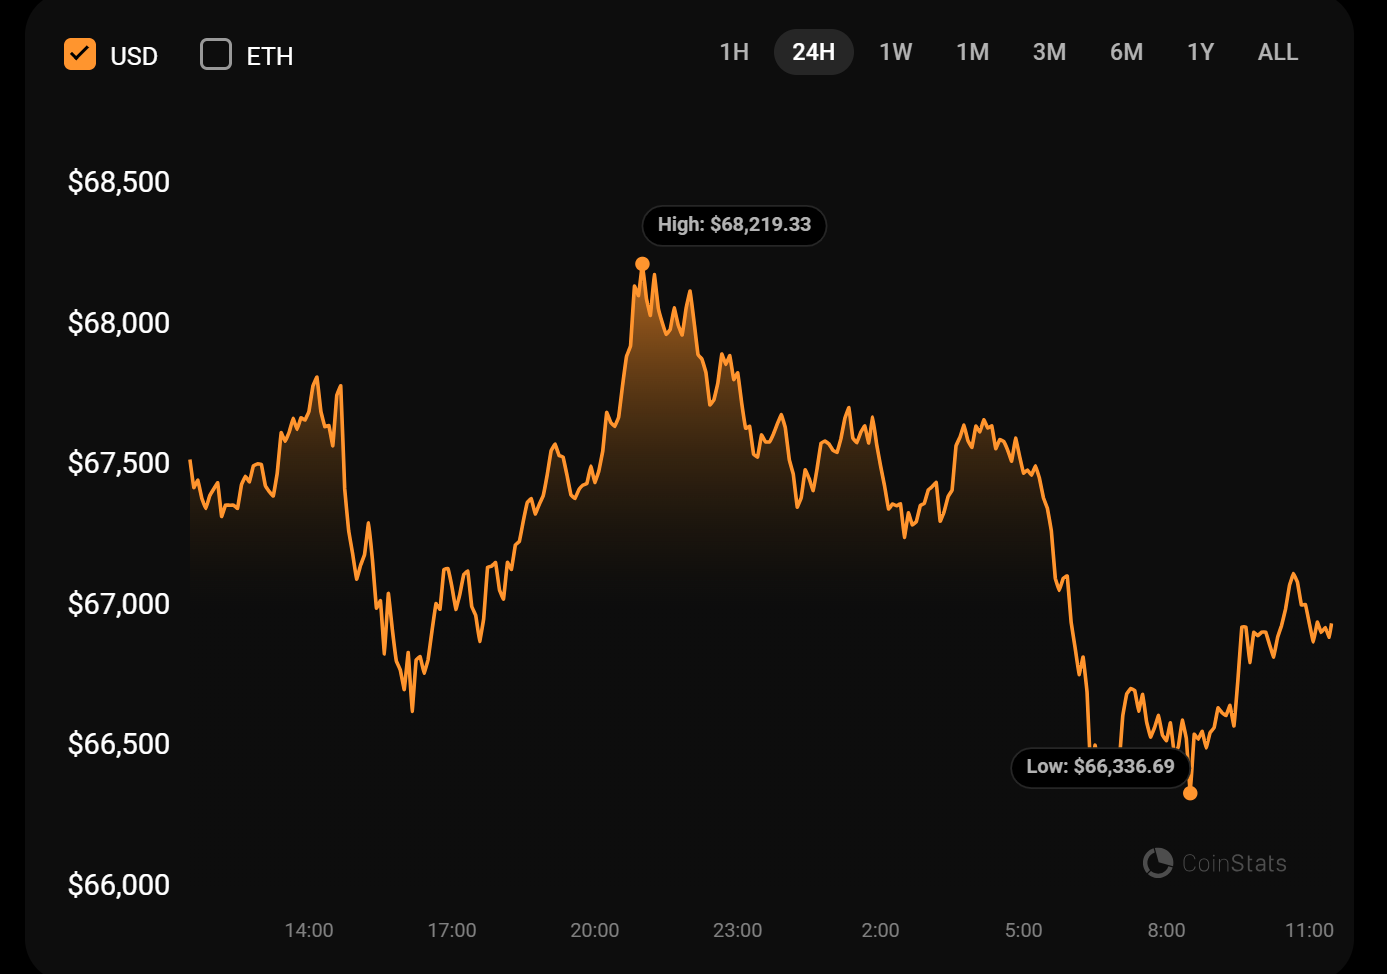 Bitcoin Holds $66K as Mt. Gox Moves $2.85B for Repayments